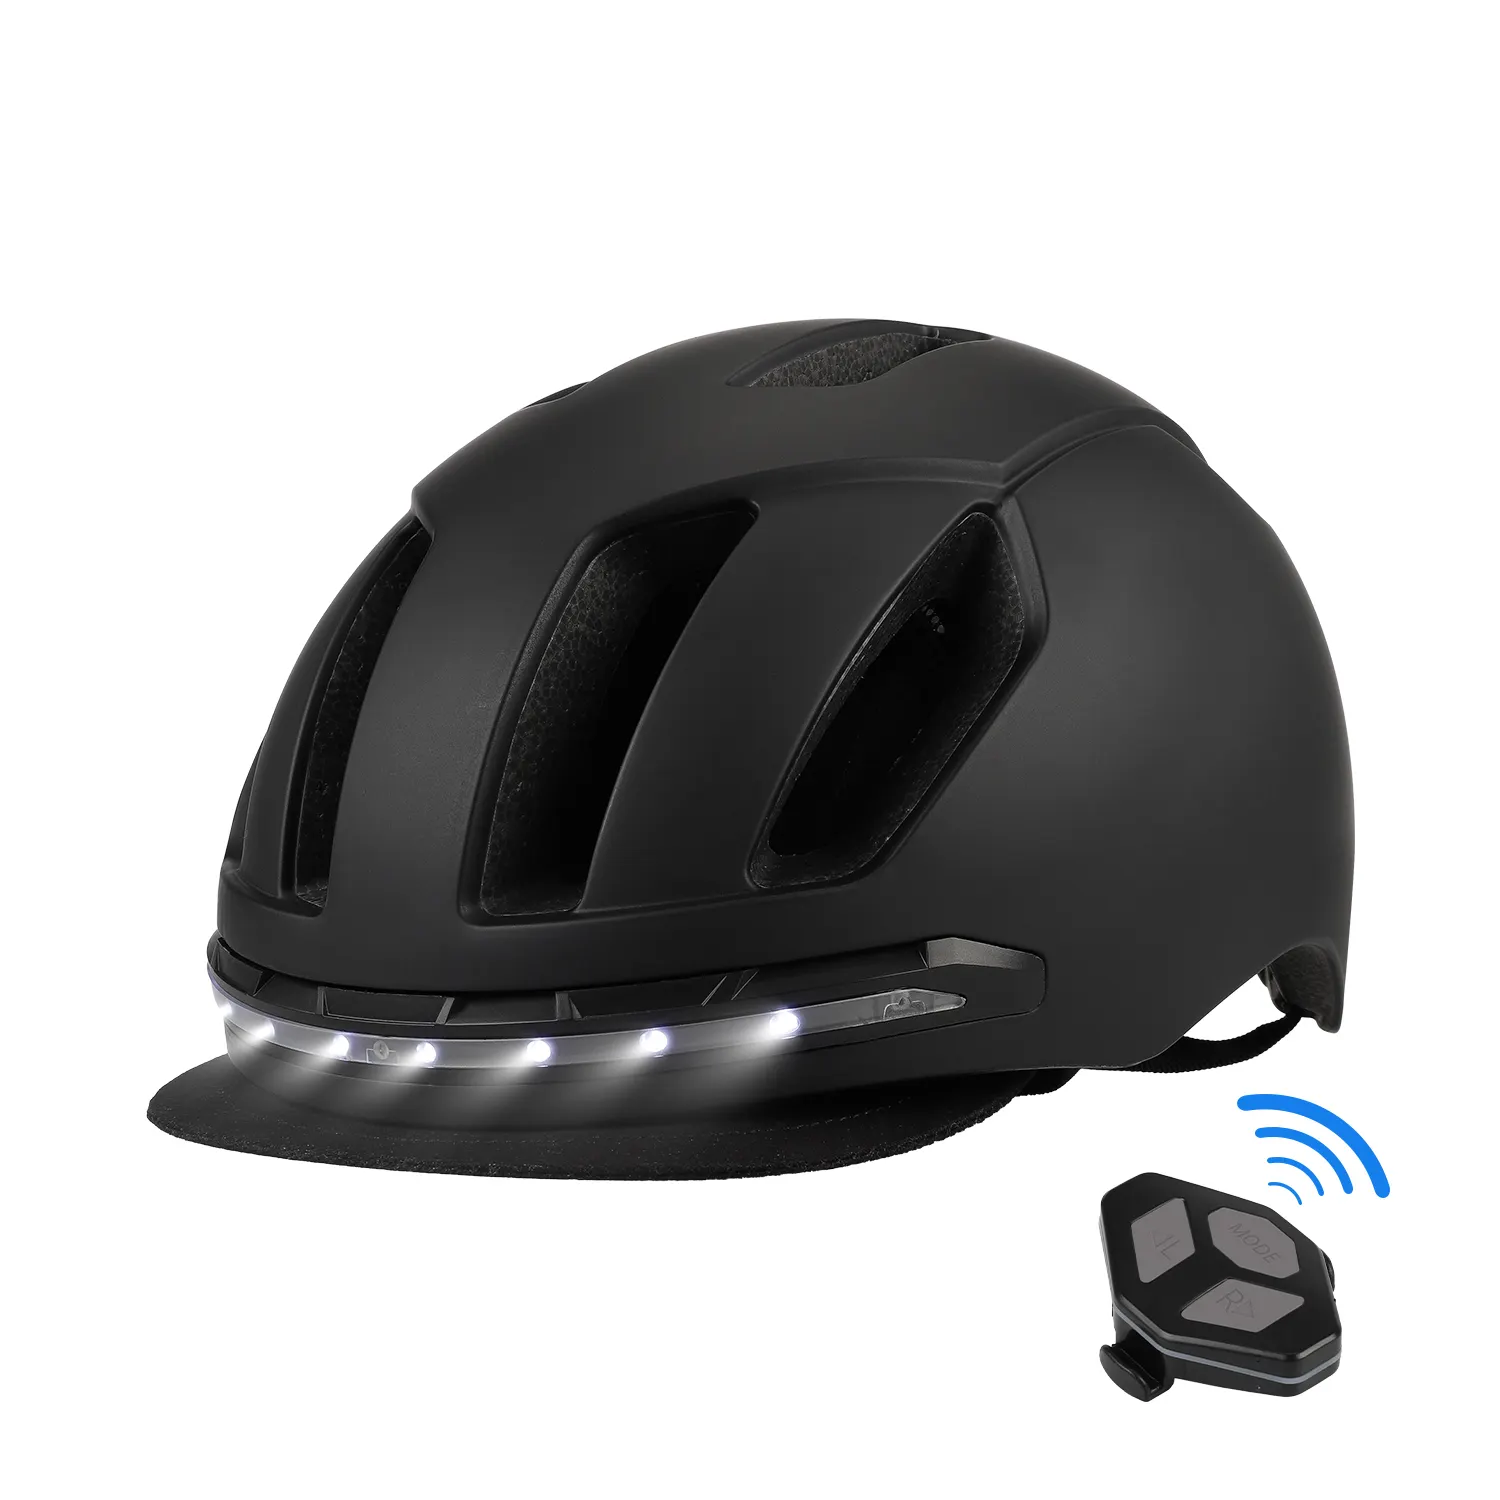 Urban LED Light Helmet Protective Bike Accessories for Xiaomi Electric Scooter Protection with Remote Control